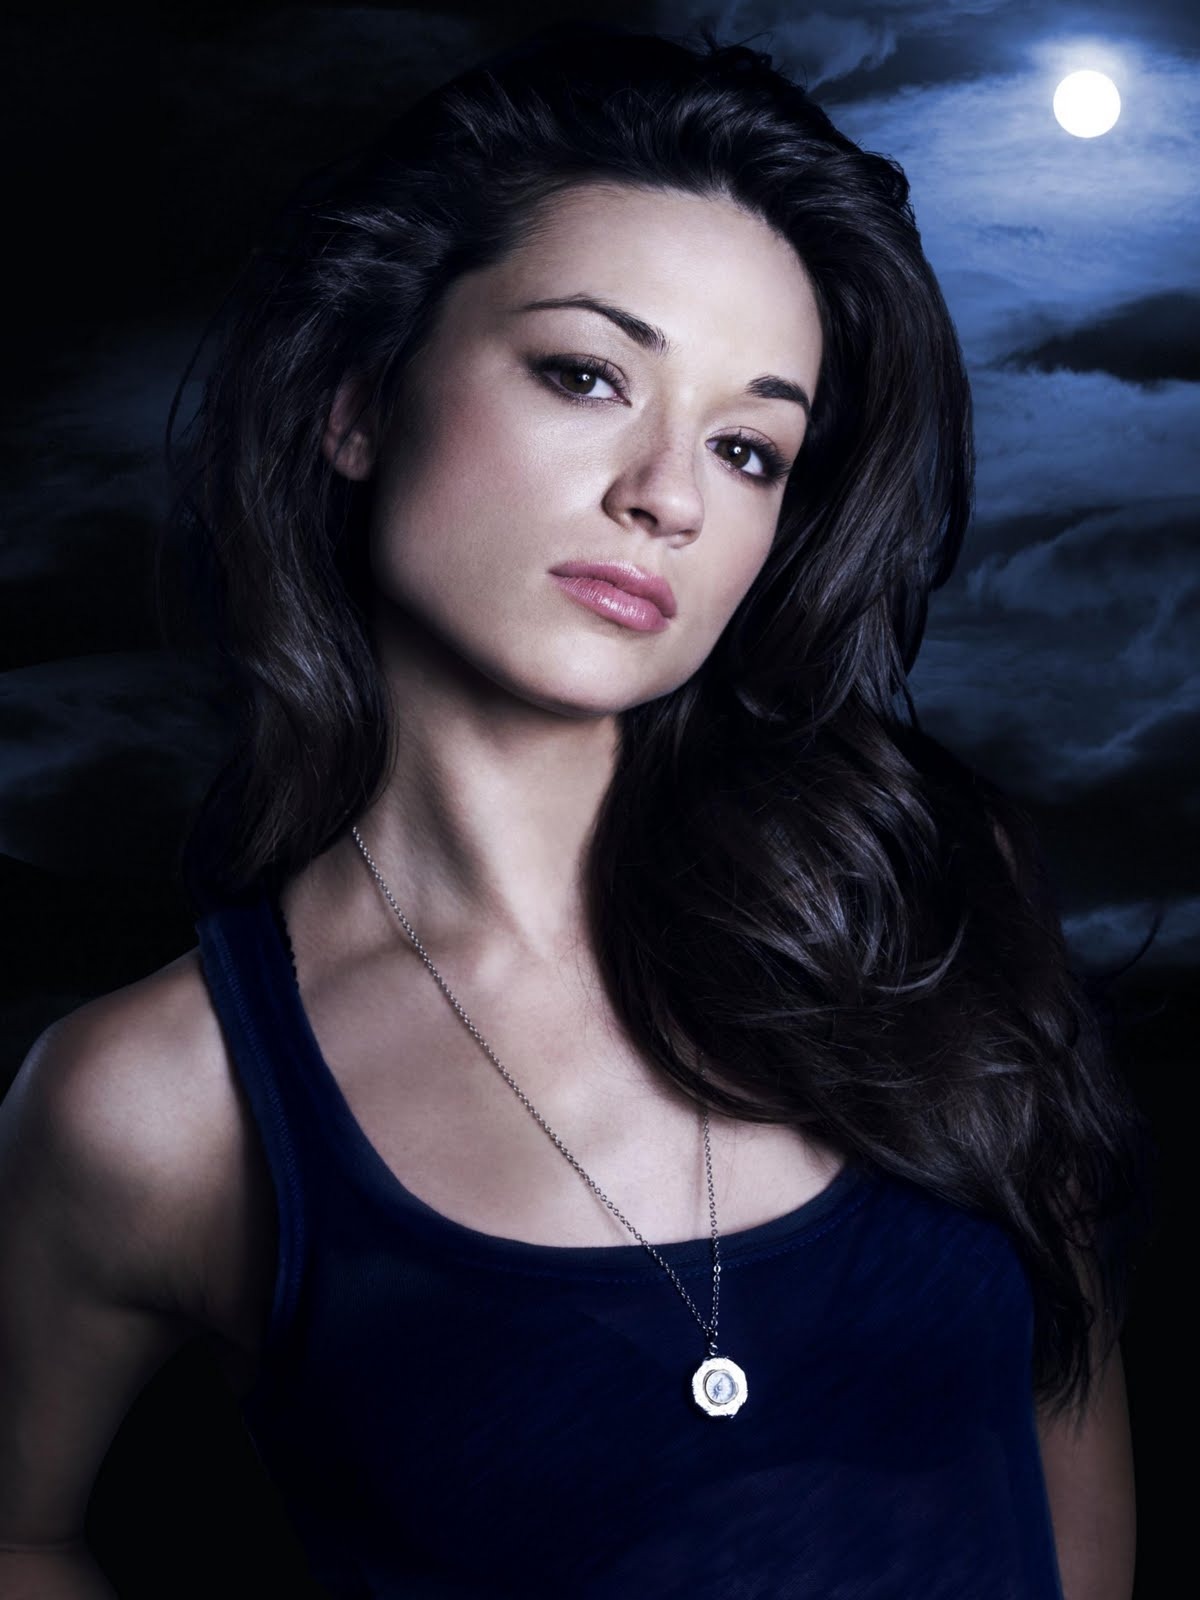 General photo of Crystal Reed